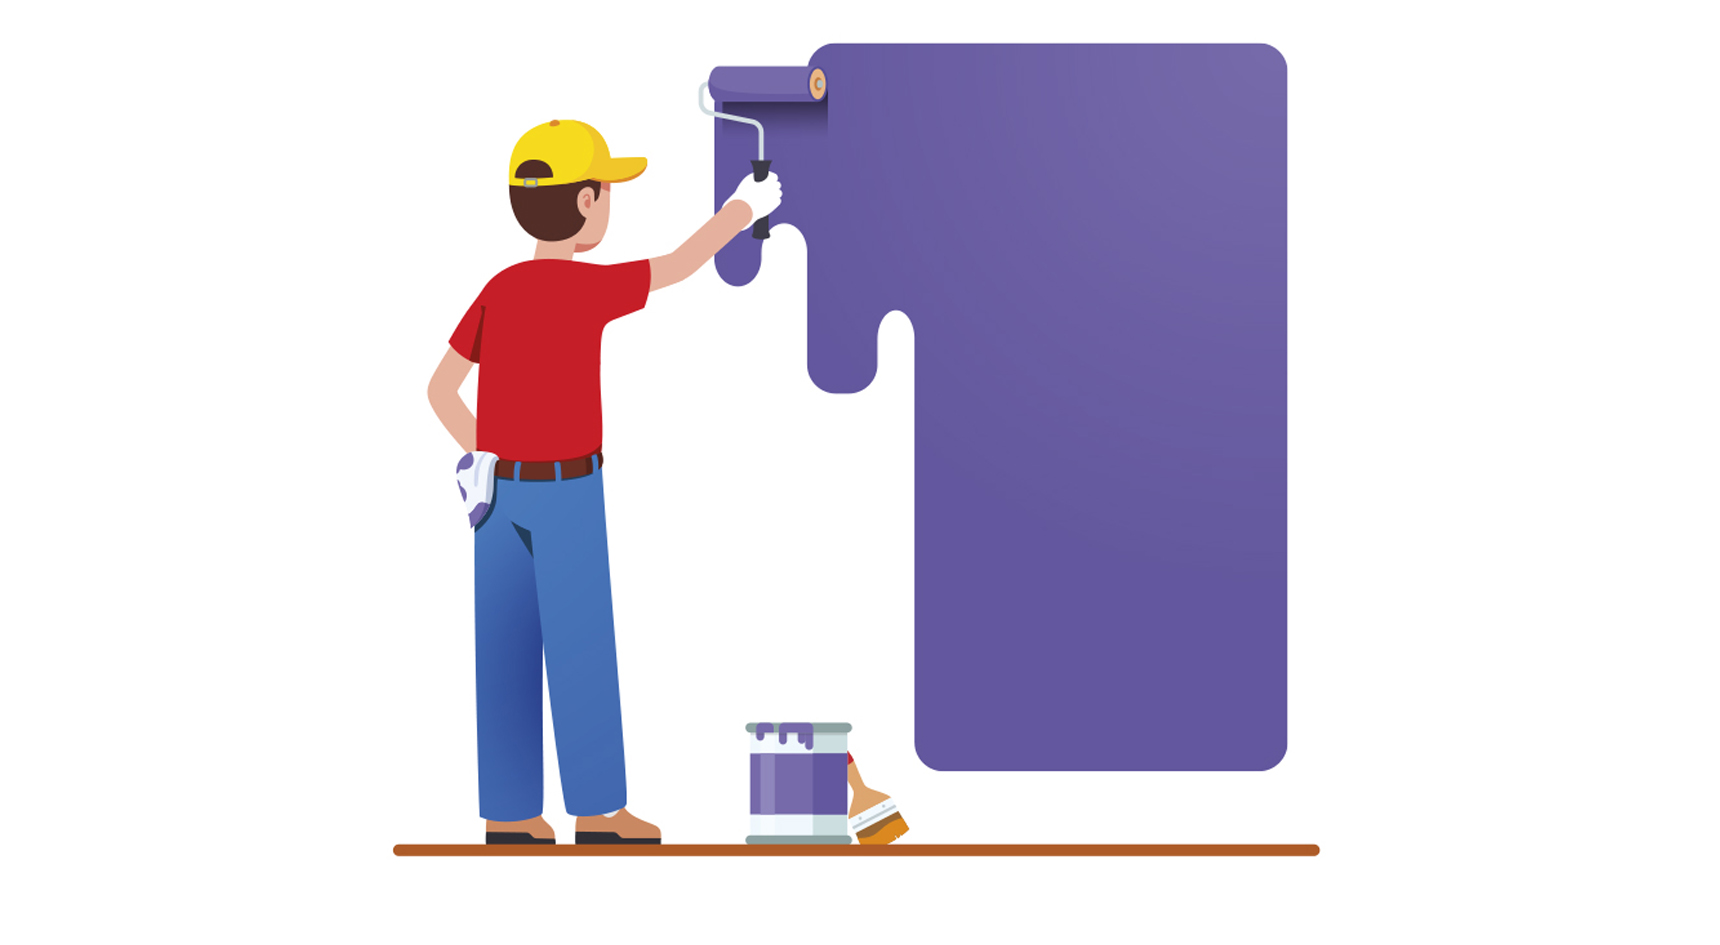 Cartoon image of man painting the walls. Image: Getty